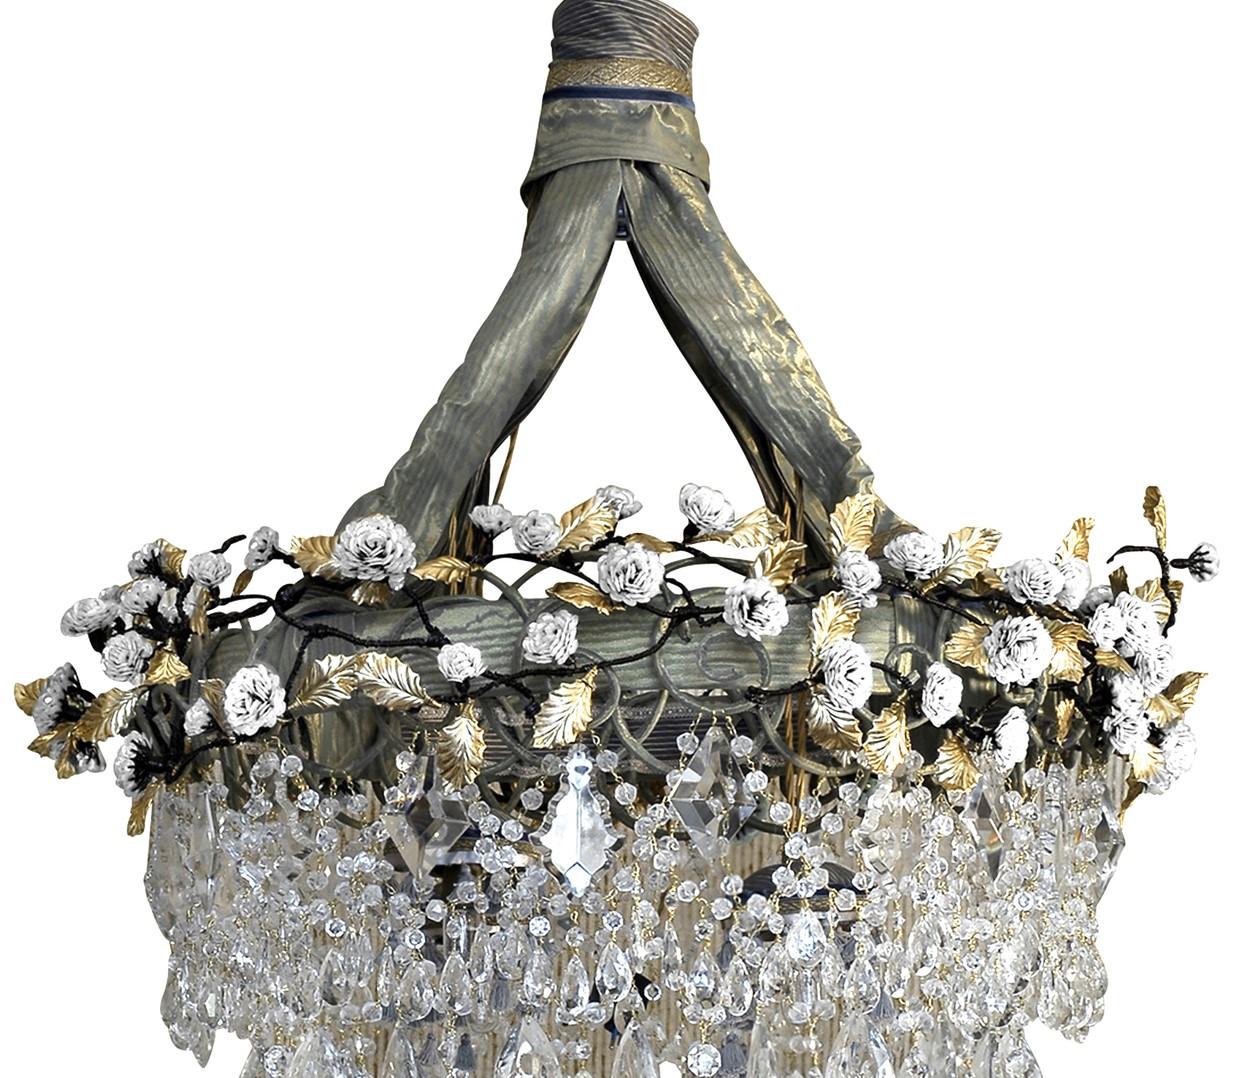 This magnificent chandelier combines the eclectic use of fabric, glass, crystals, brass and sequins to create a romantic effect. 3,000 sequins are attached with the use of 100 meters of wire to poetically evoke the branches of a delicate rose bush.